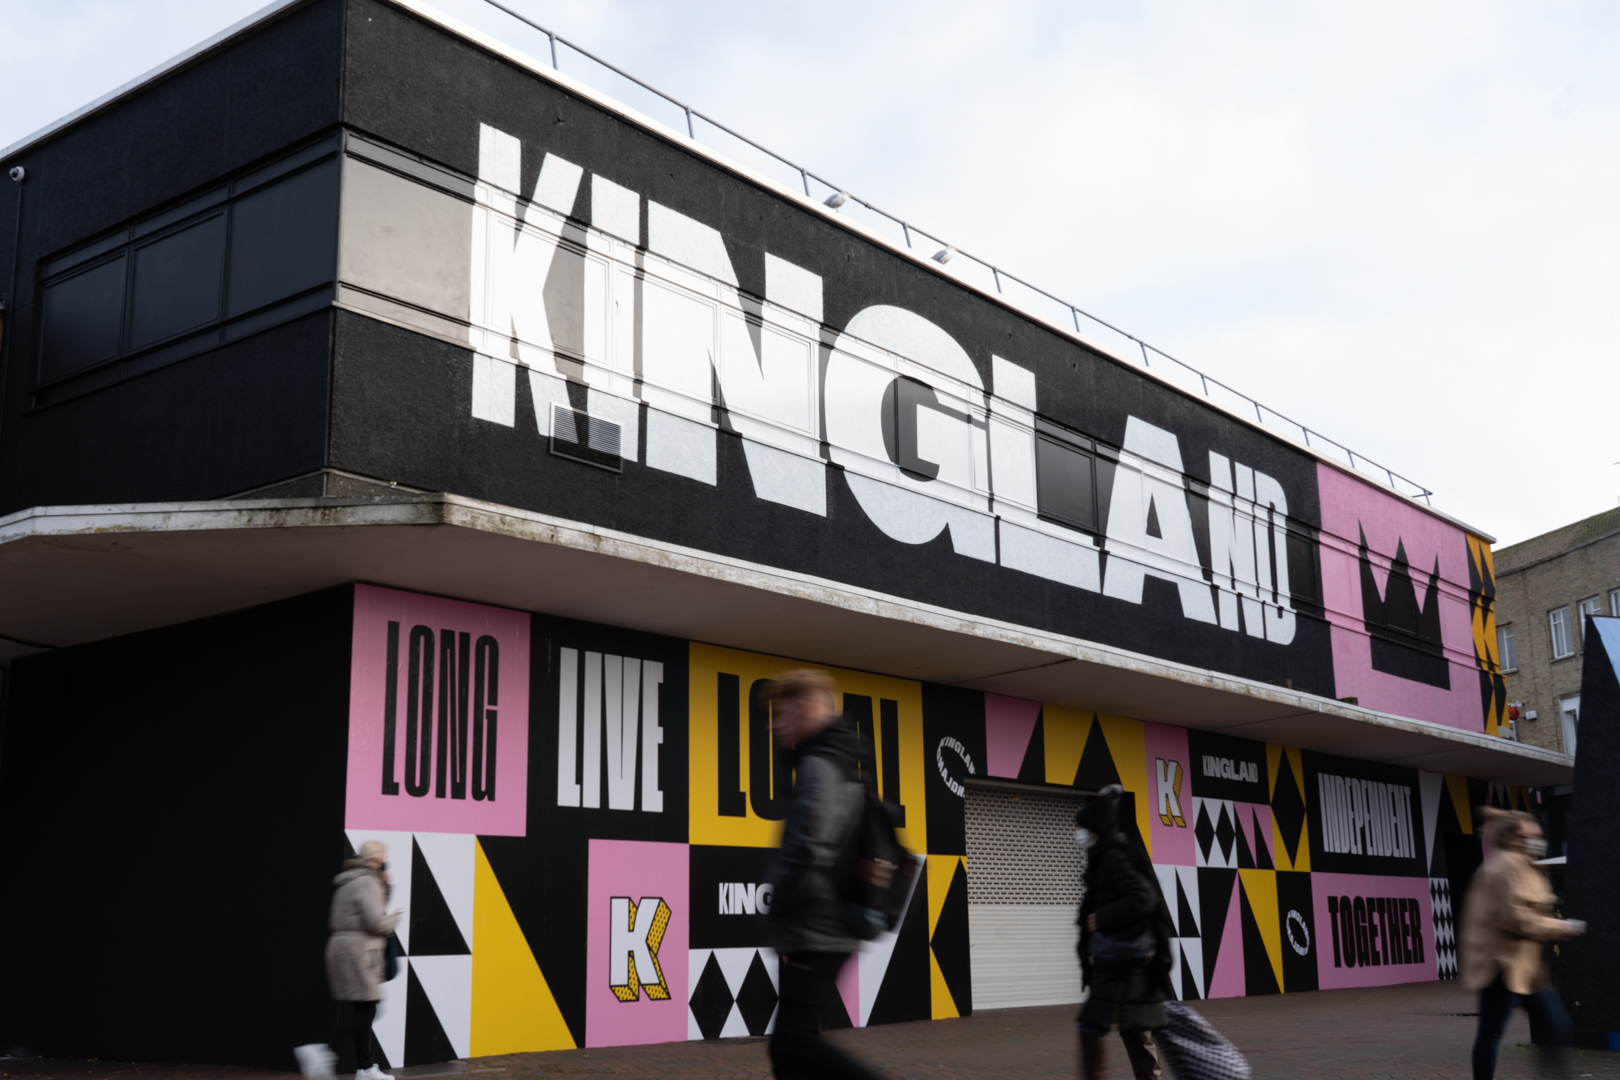 KINGLAND has now officially launched in Poole town centre